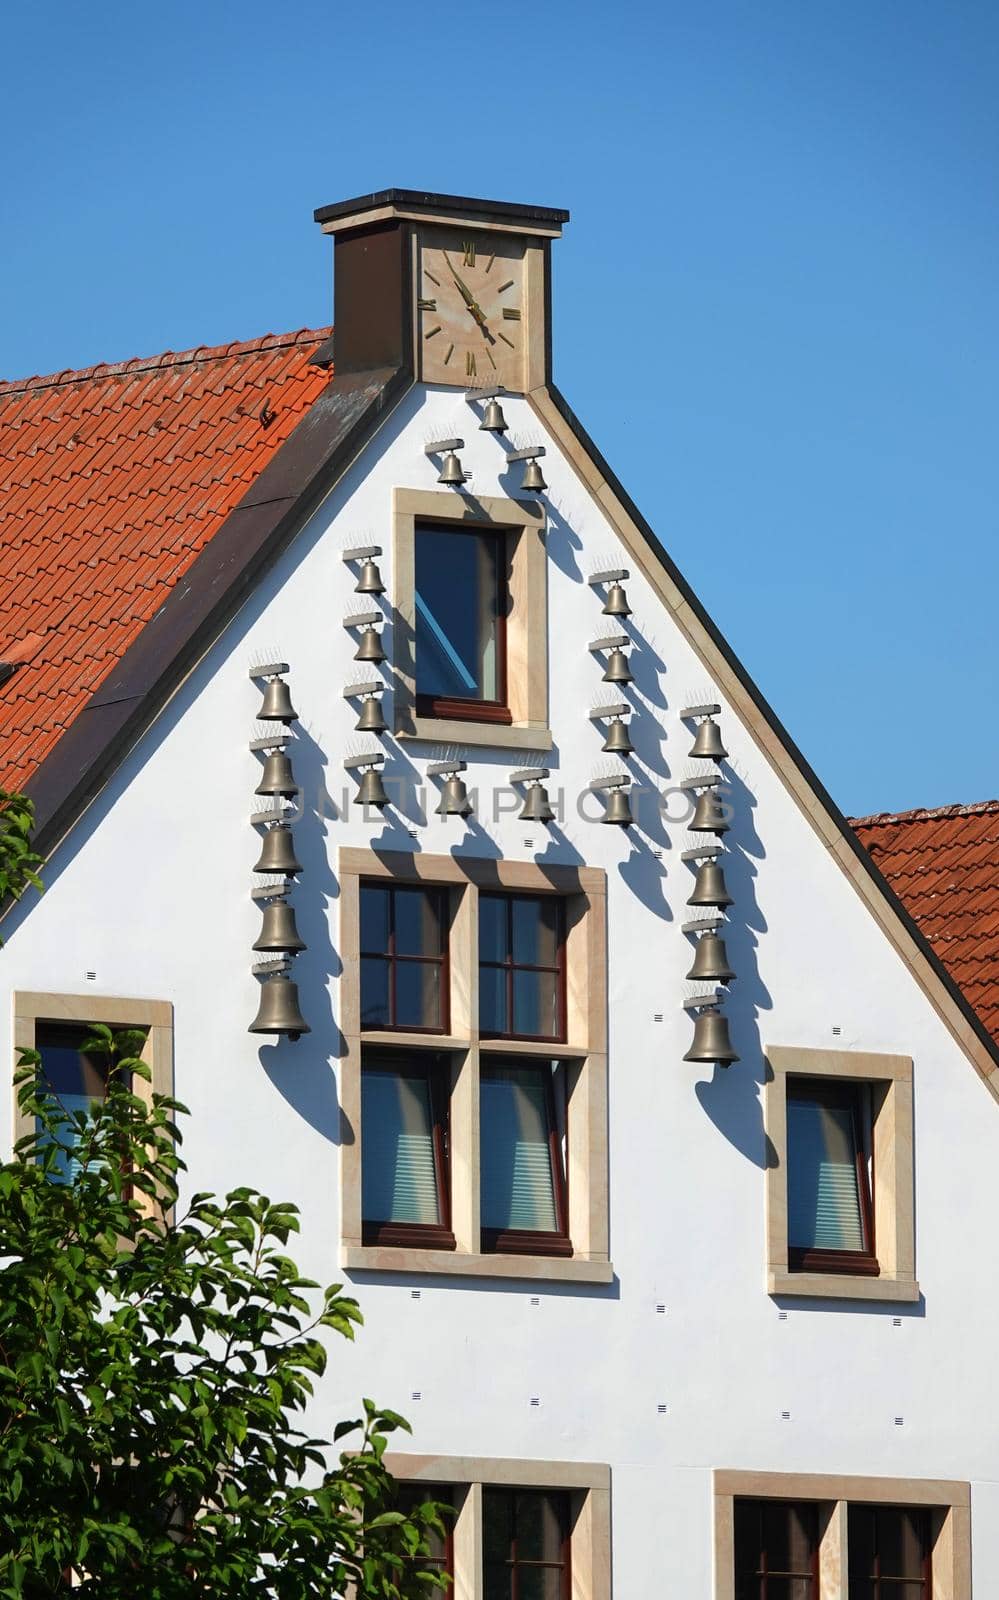 Rheine, NRW, Germany - August 24 2022 On the gable of this house in Rheine is a carillon attached to the wall. It's called 'Glockenhaus' (Bell-house)